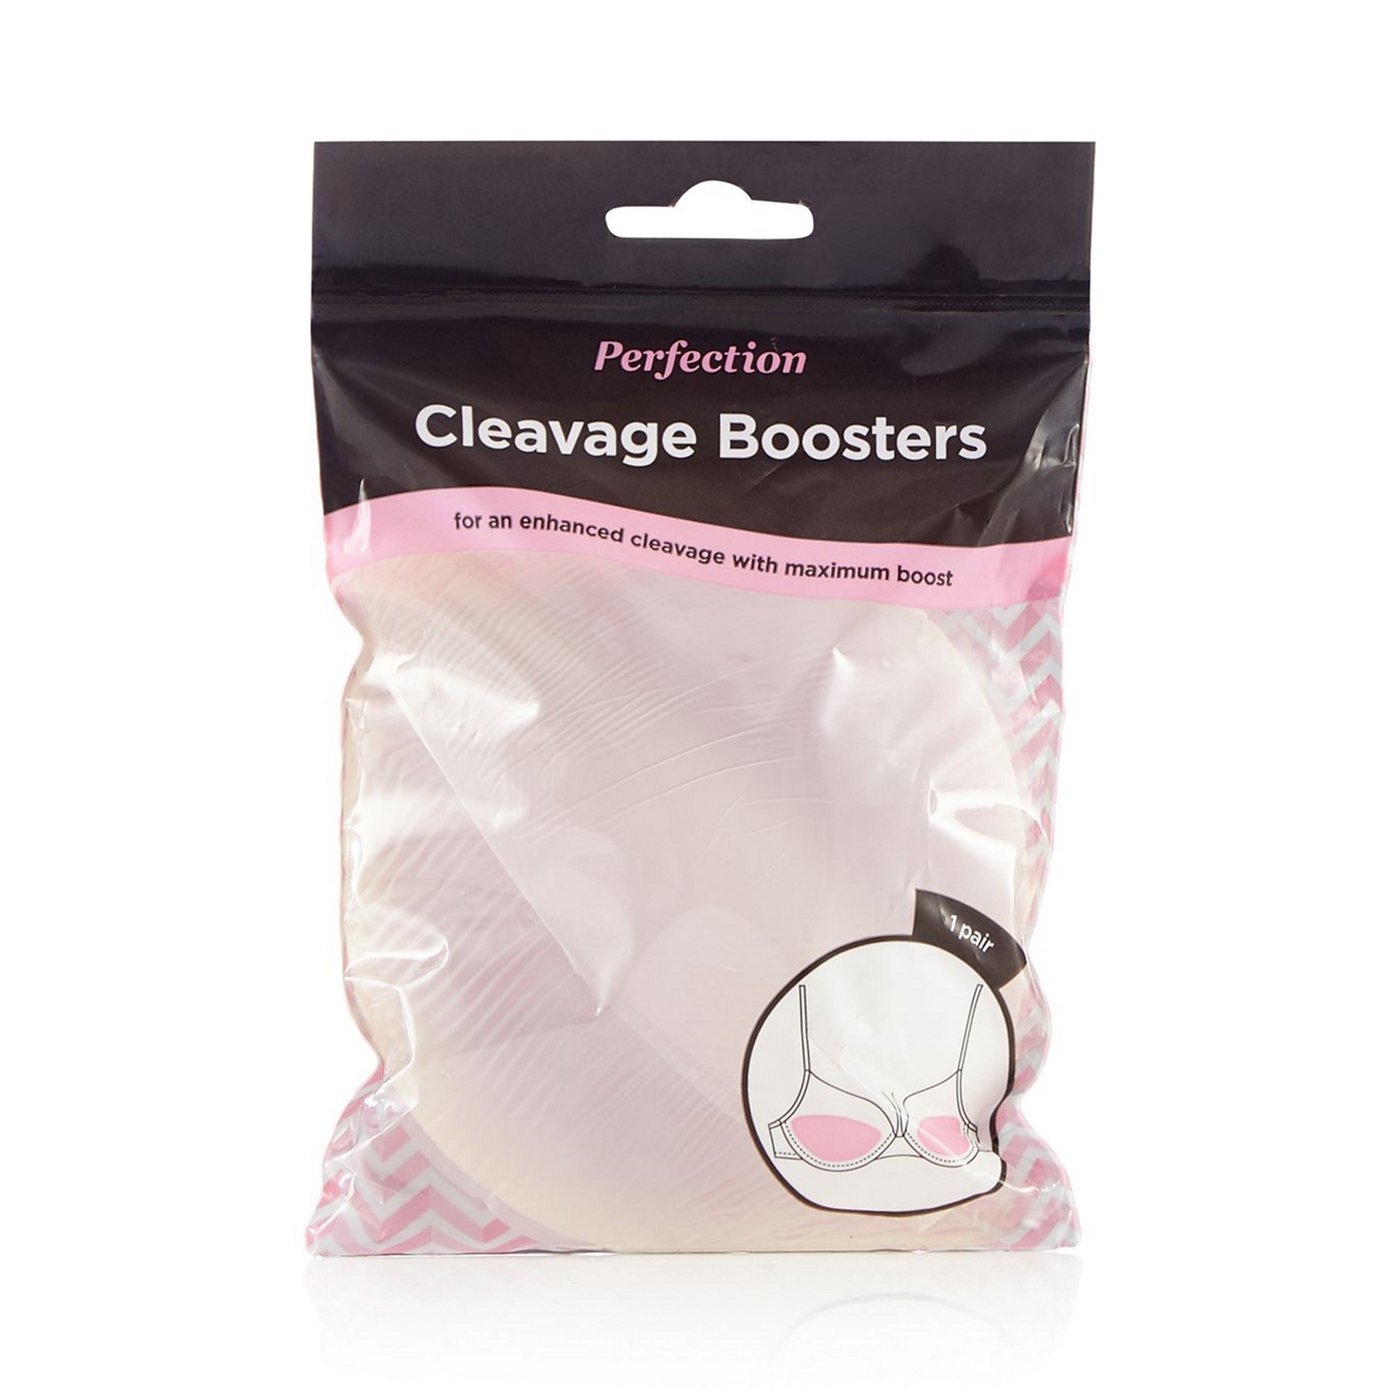 Perfection Beauty Clear cleavage boosters